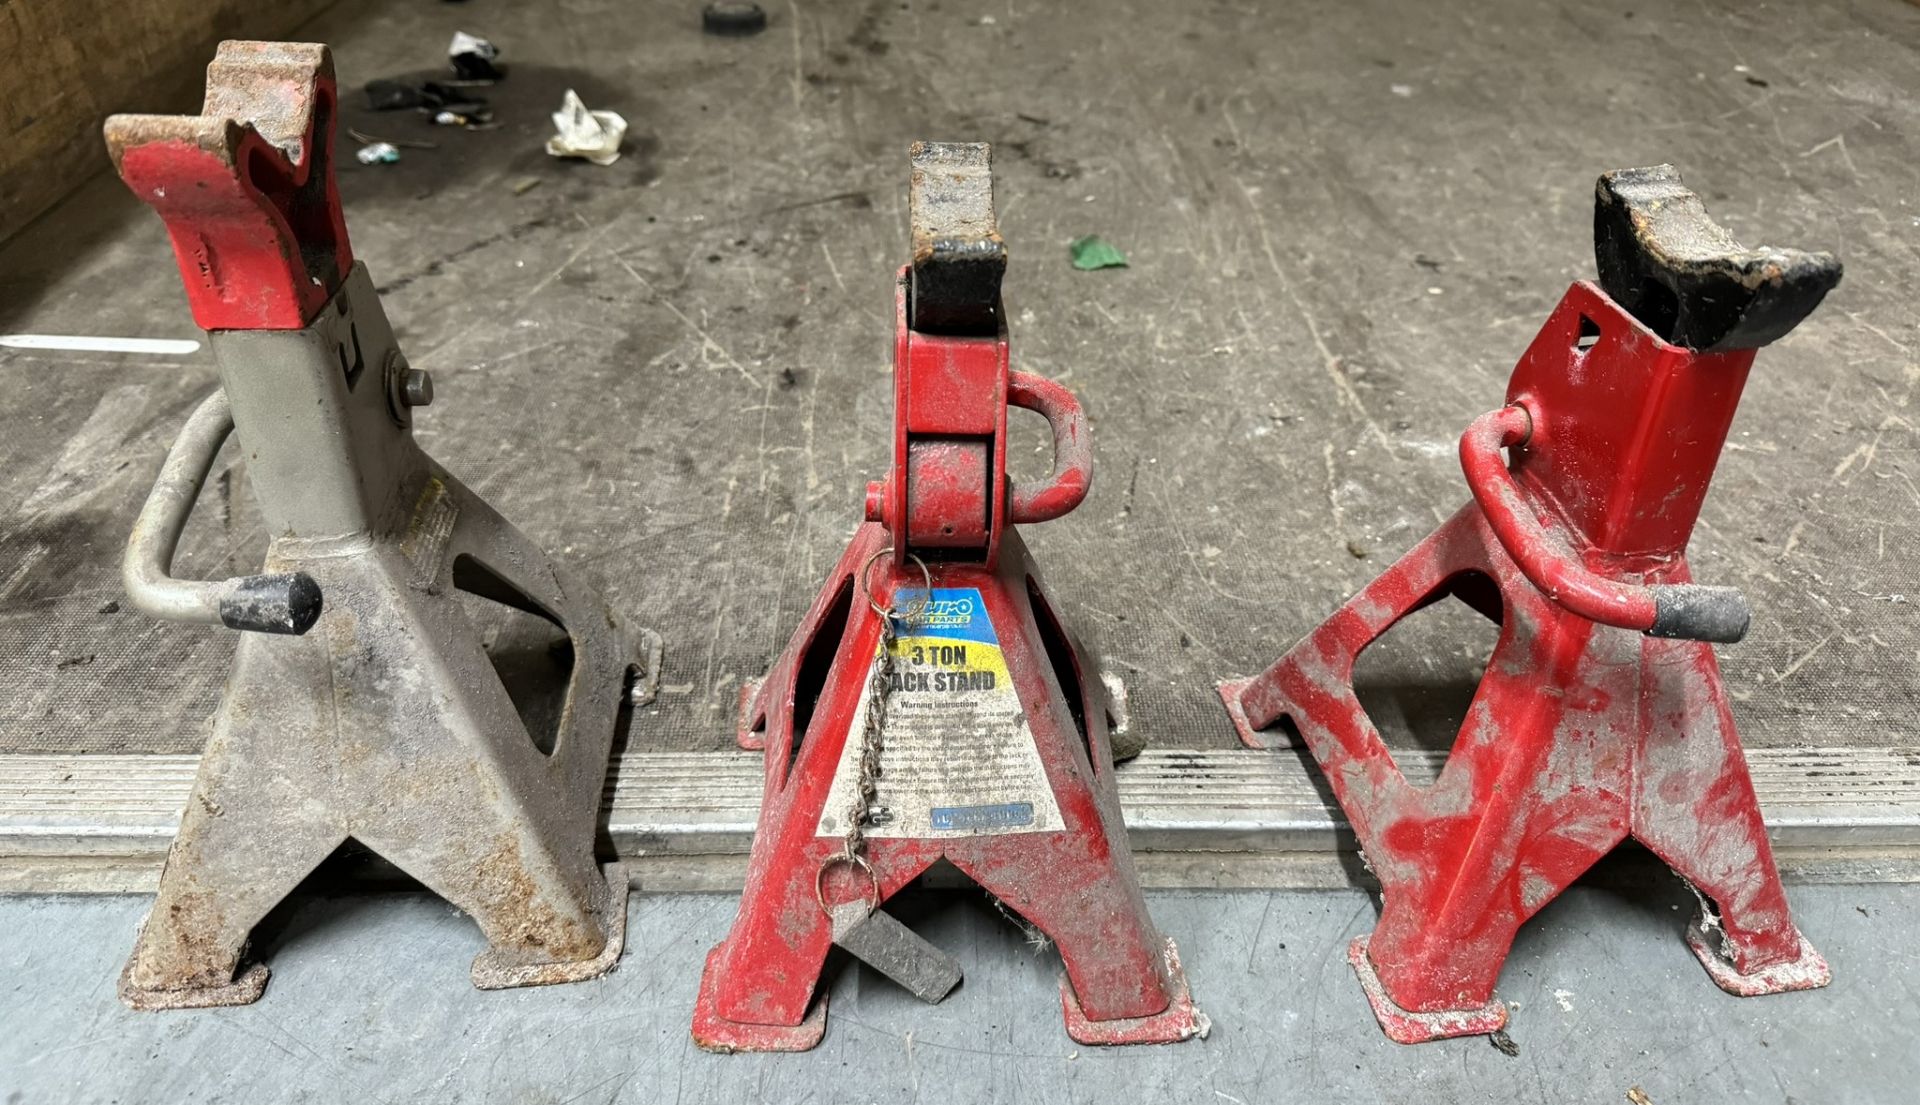 3 x Various Jack Stands - As Pictured